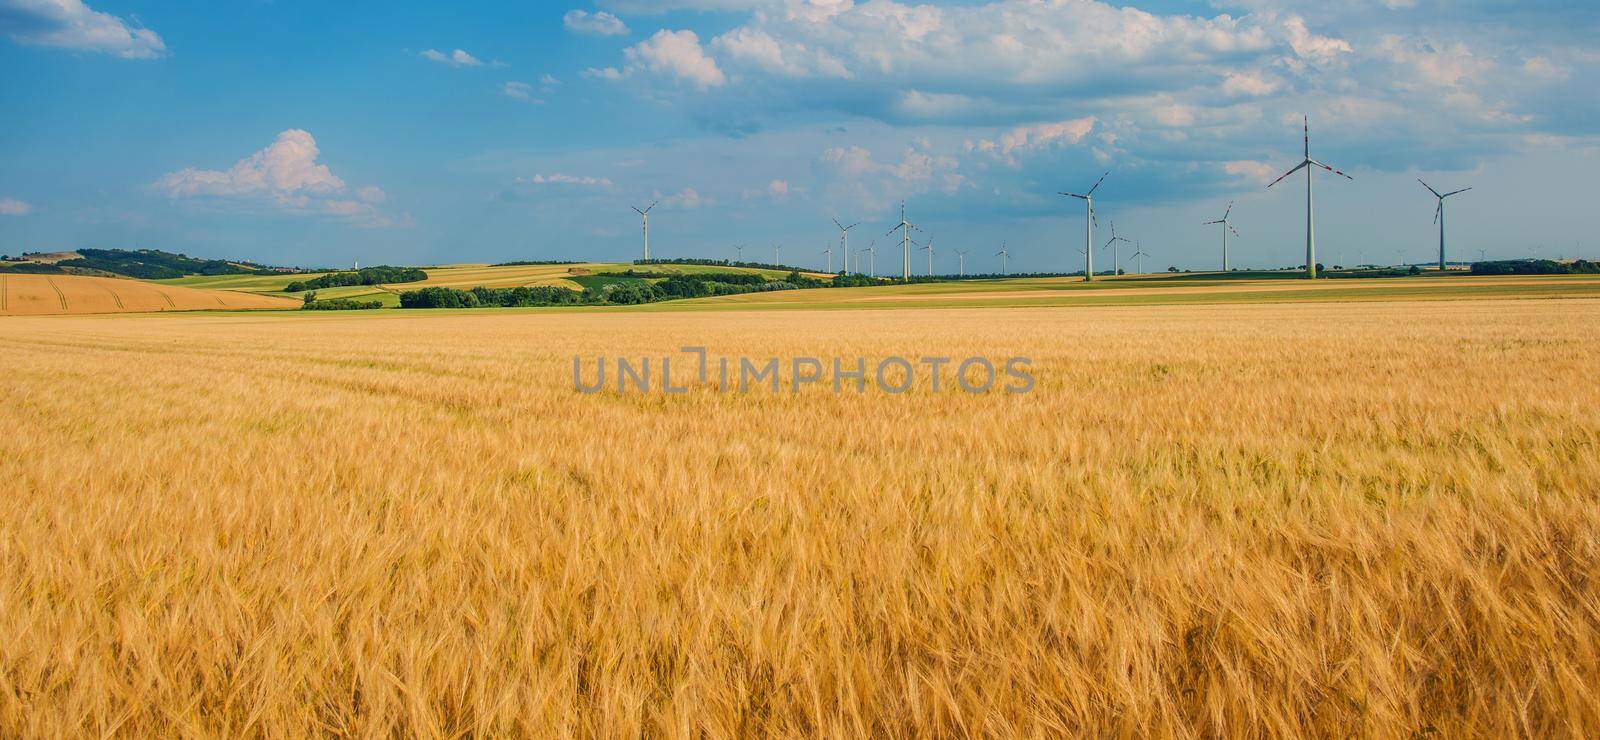 Panoramic View Of Field Of Golden Wheat With Wind Mills In Background.  by welcomia